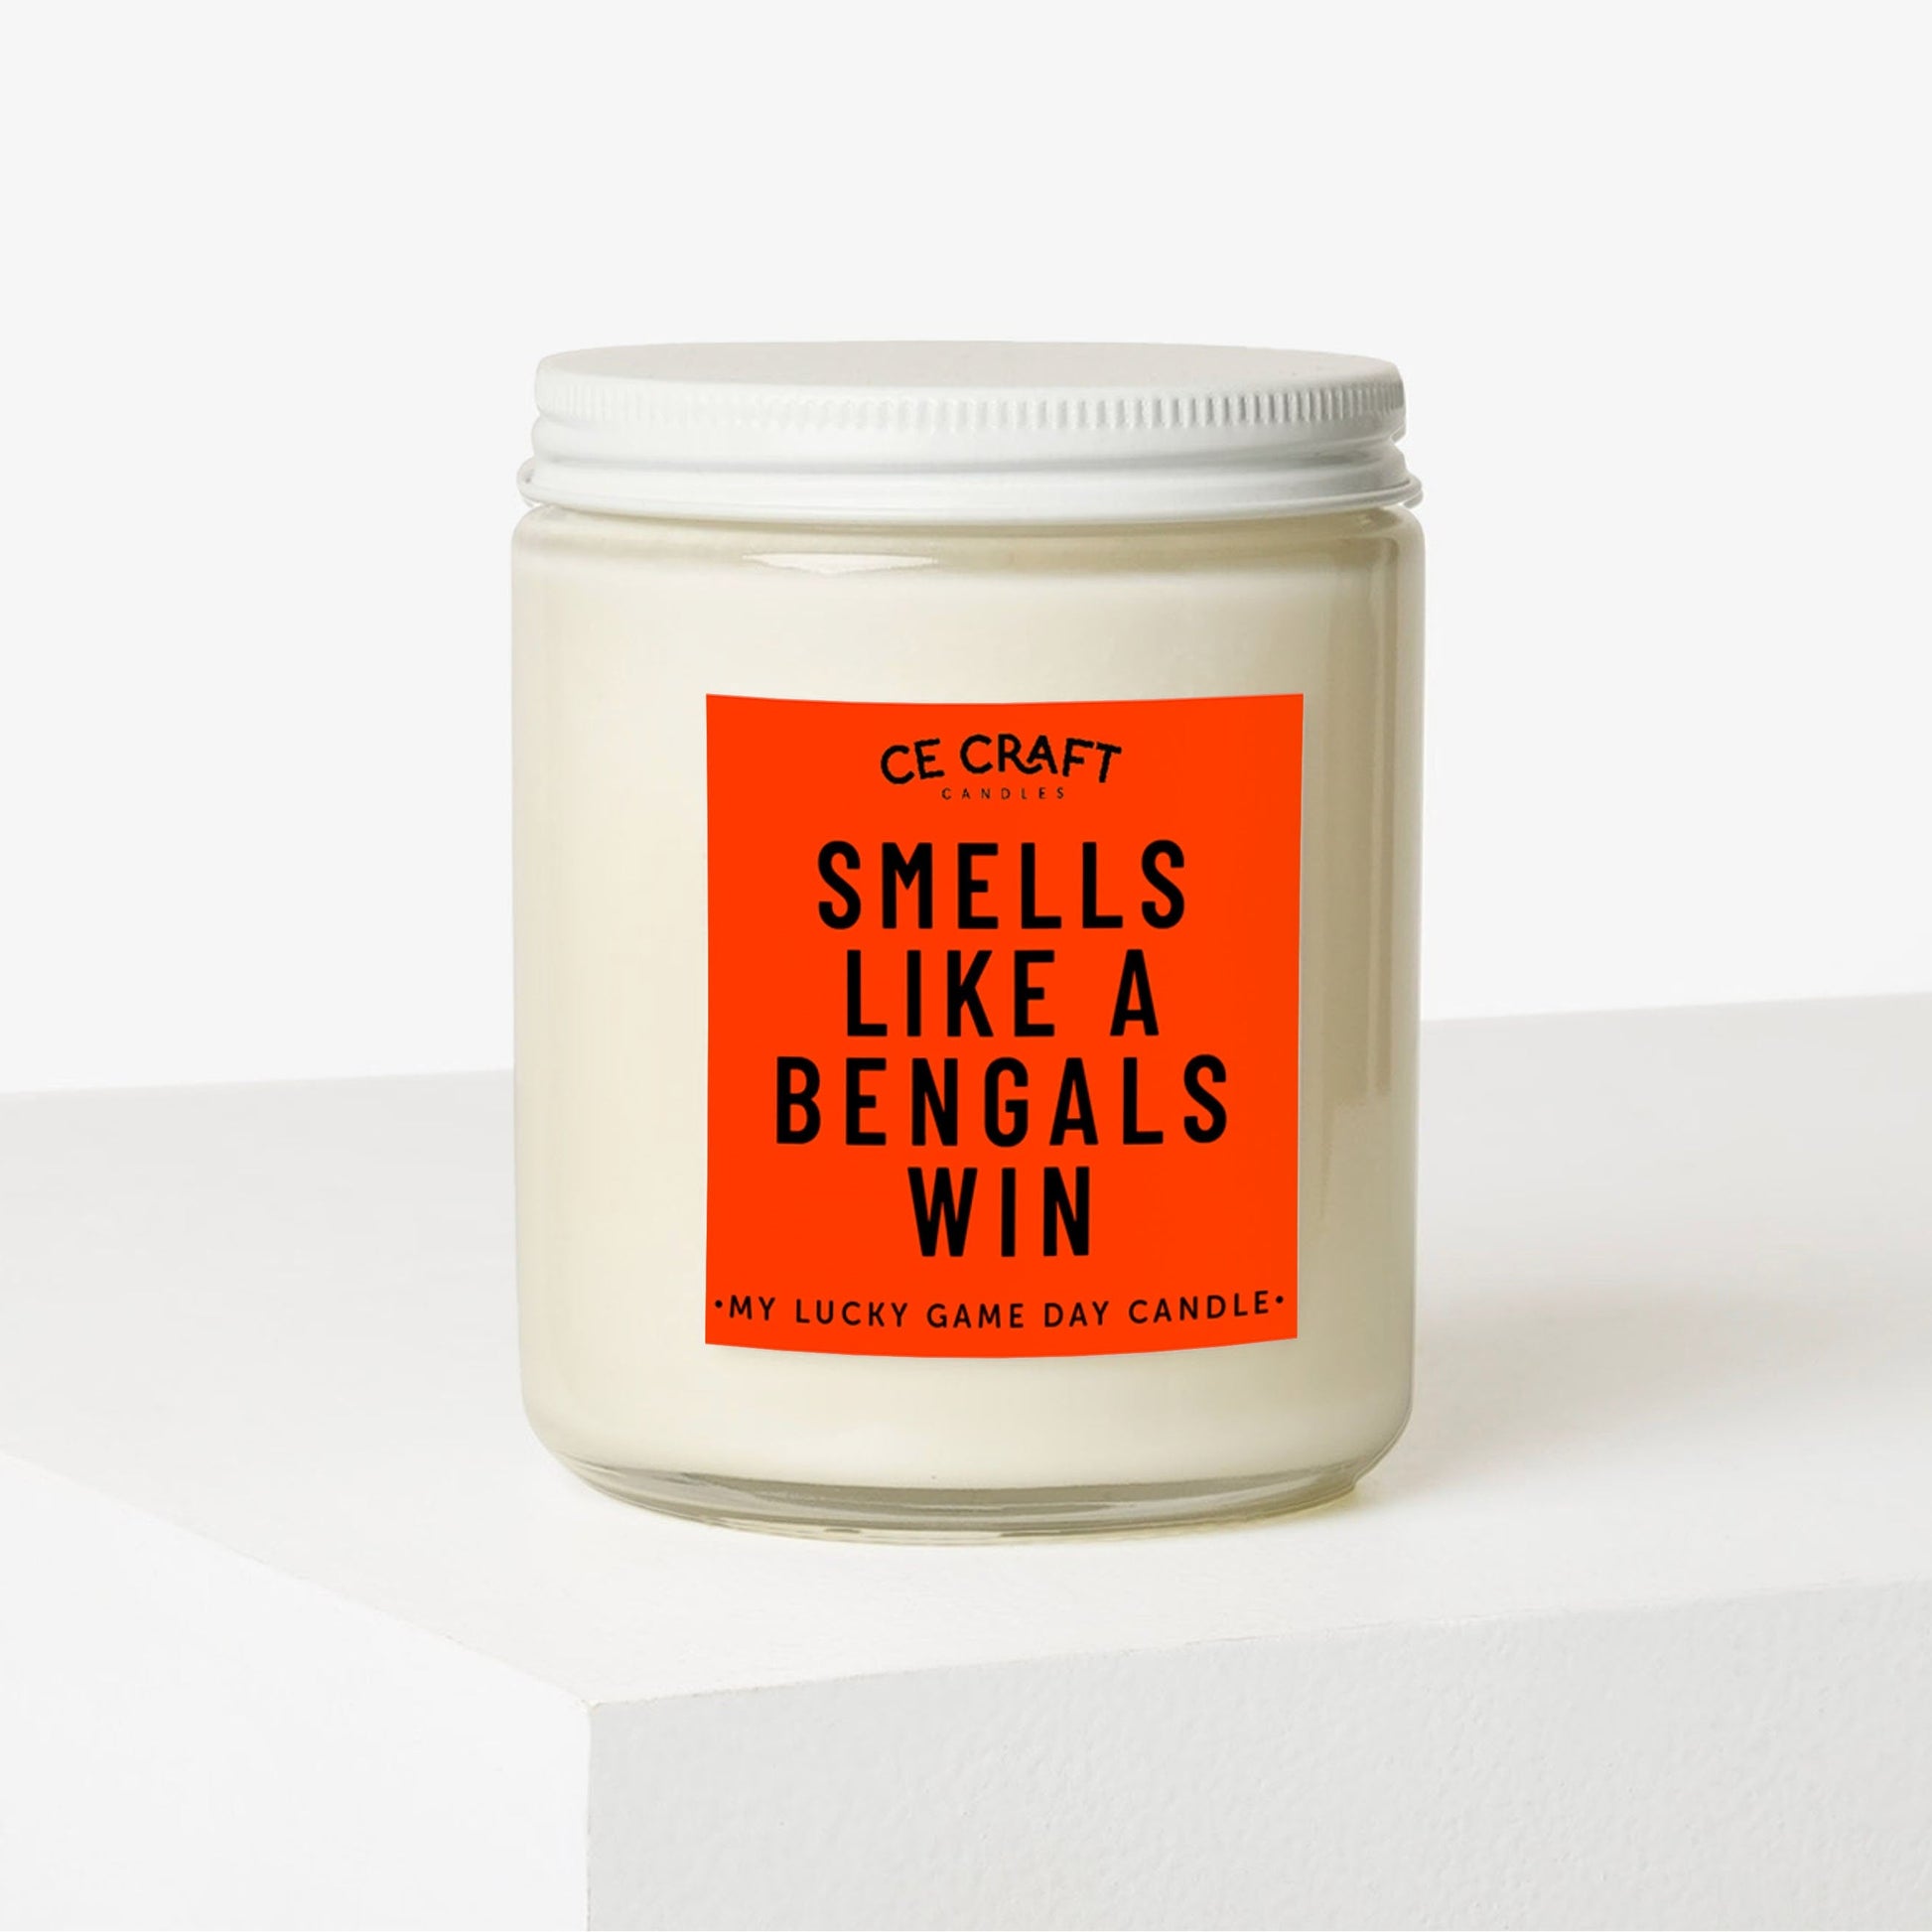 Smells Like a Bengals Win Scented Candle C & E Craft Co 